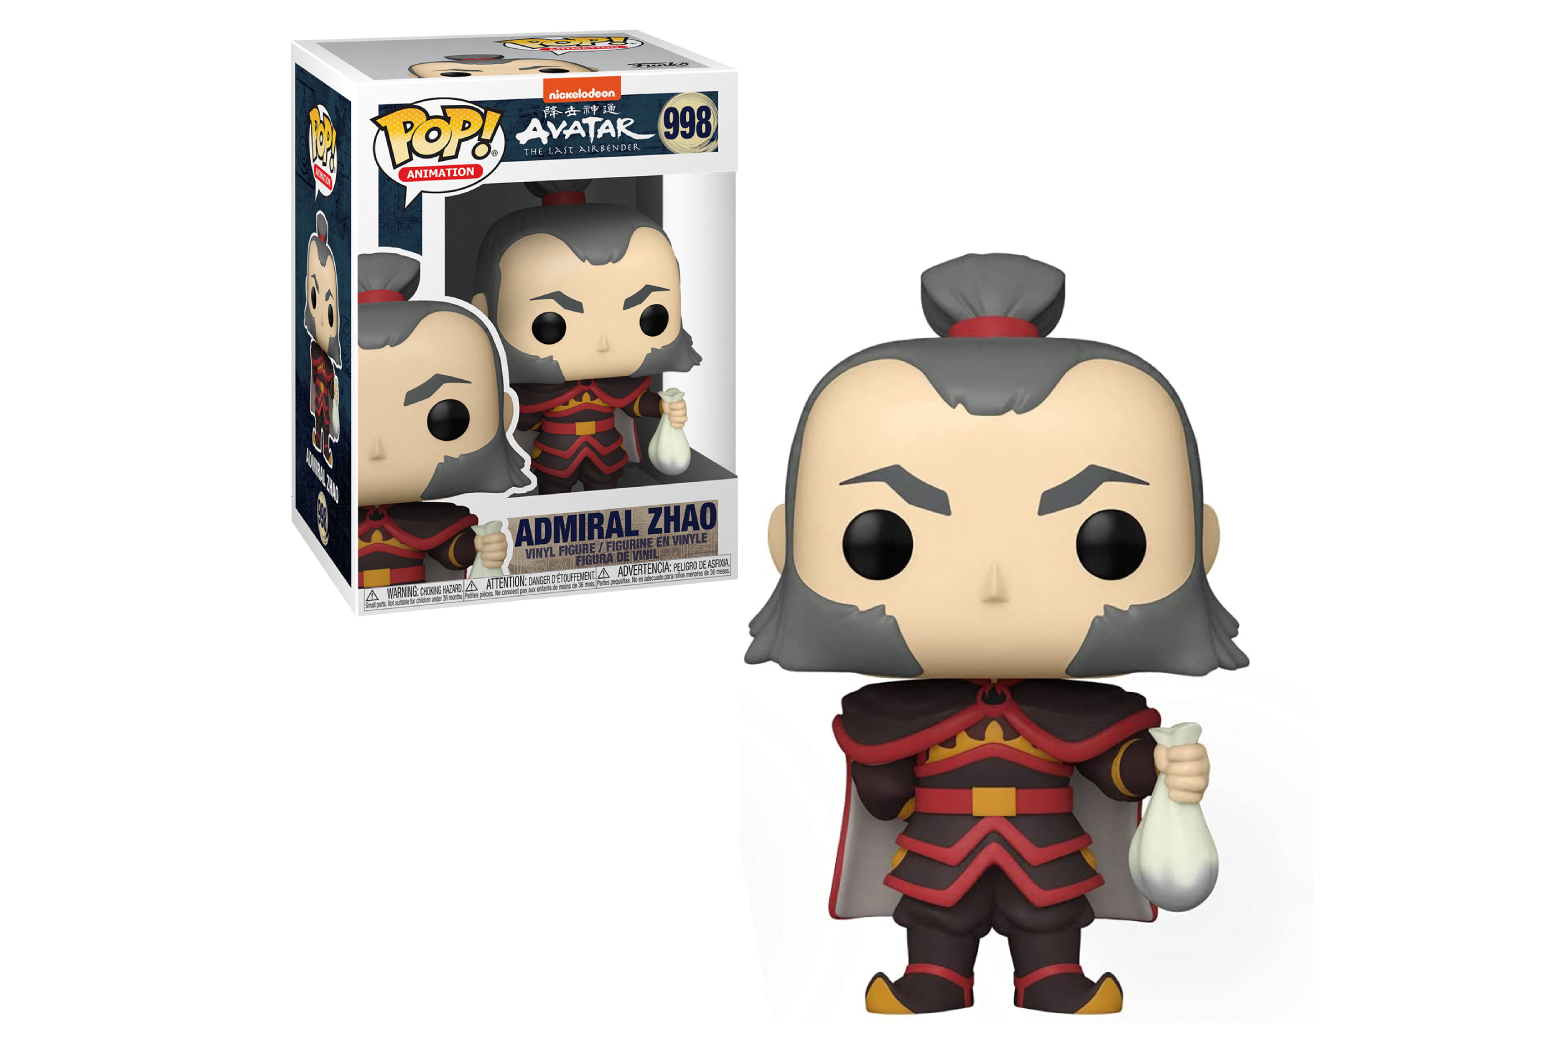 POP! Animation: Avatar: The Last Airbender - Admiral Zhao